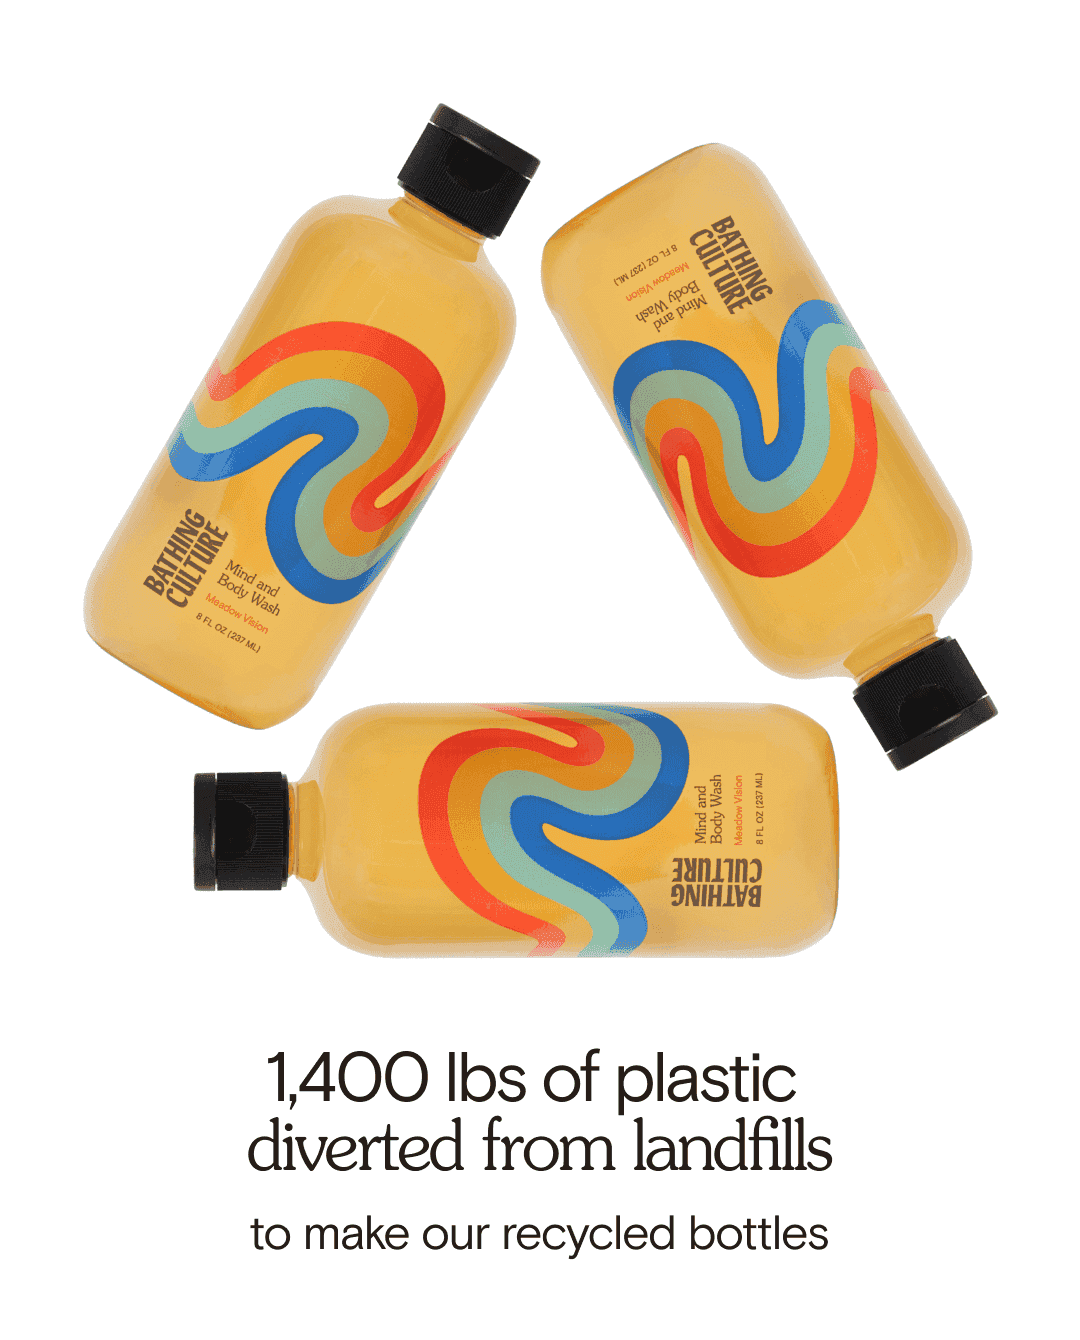 1400 lbs of plastic diverted from landfills to make our recycled bottles